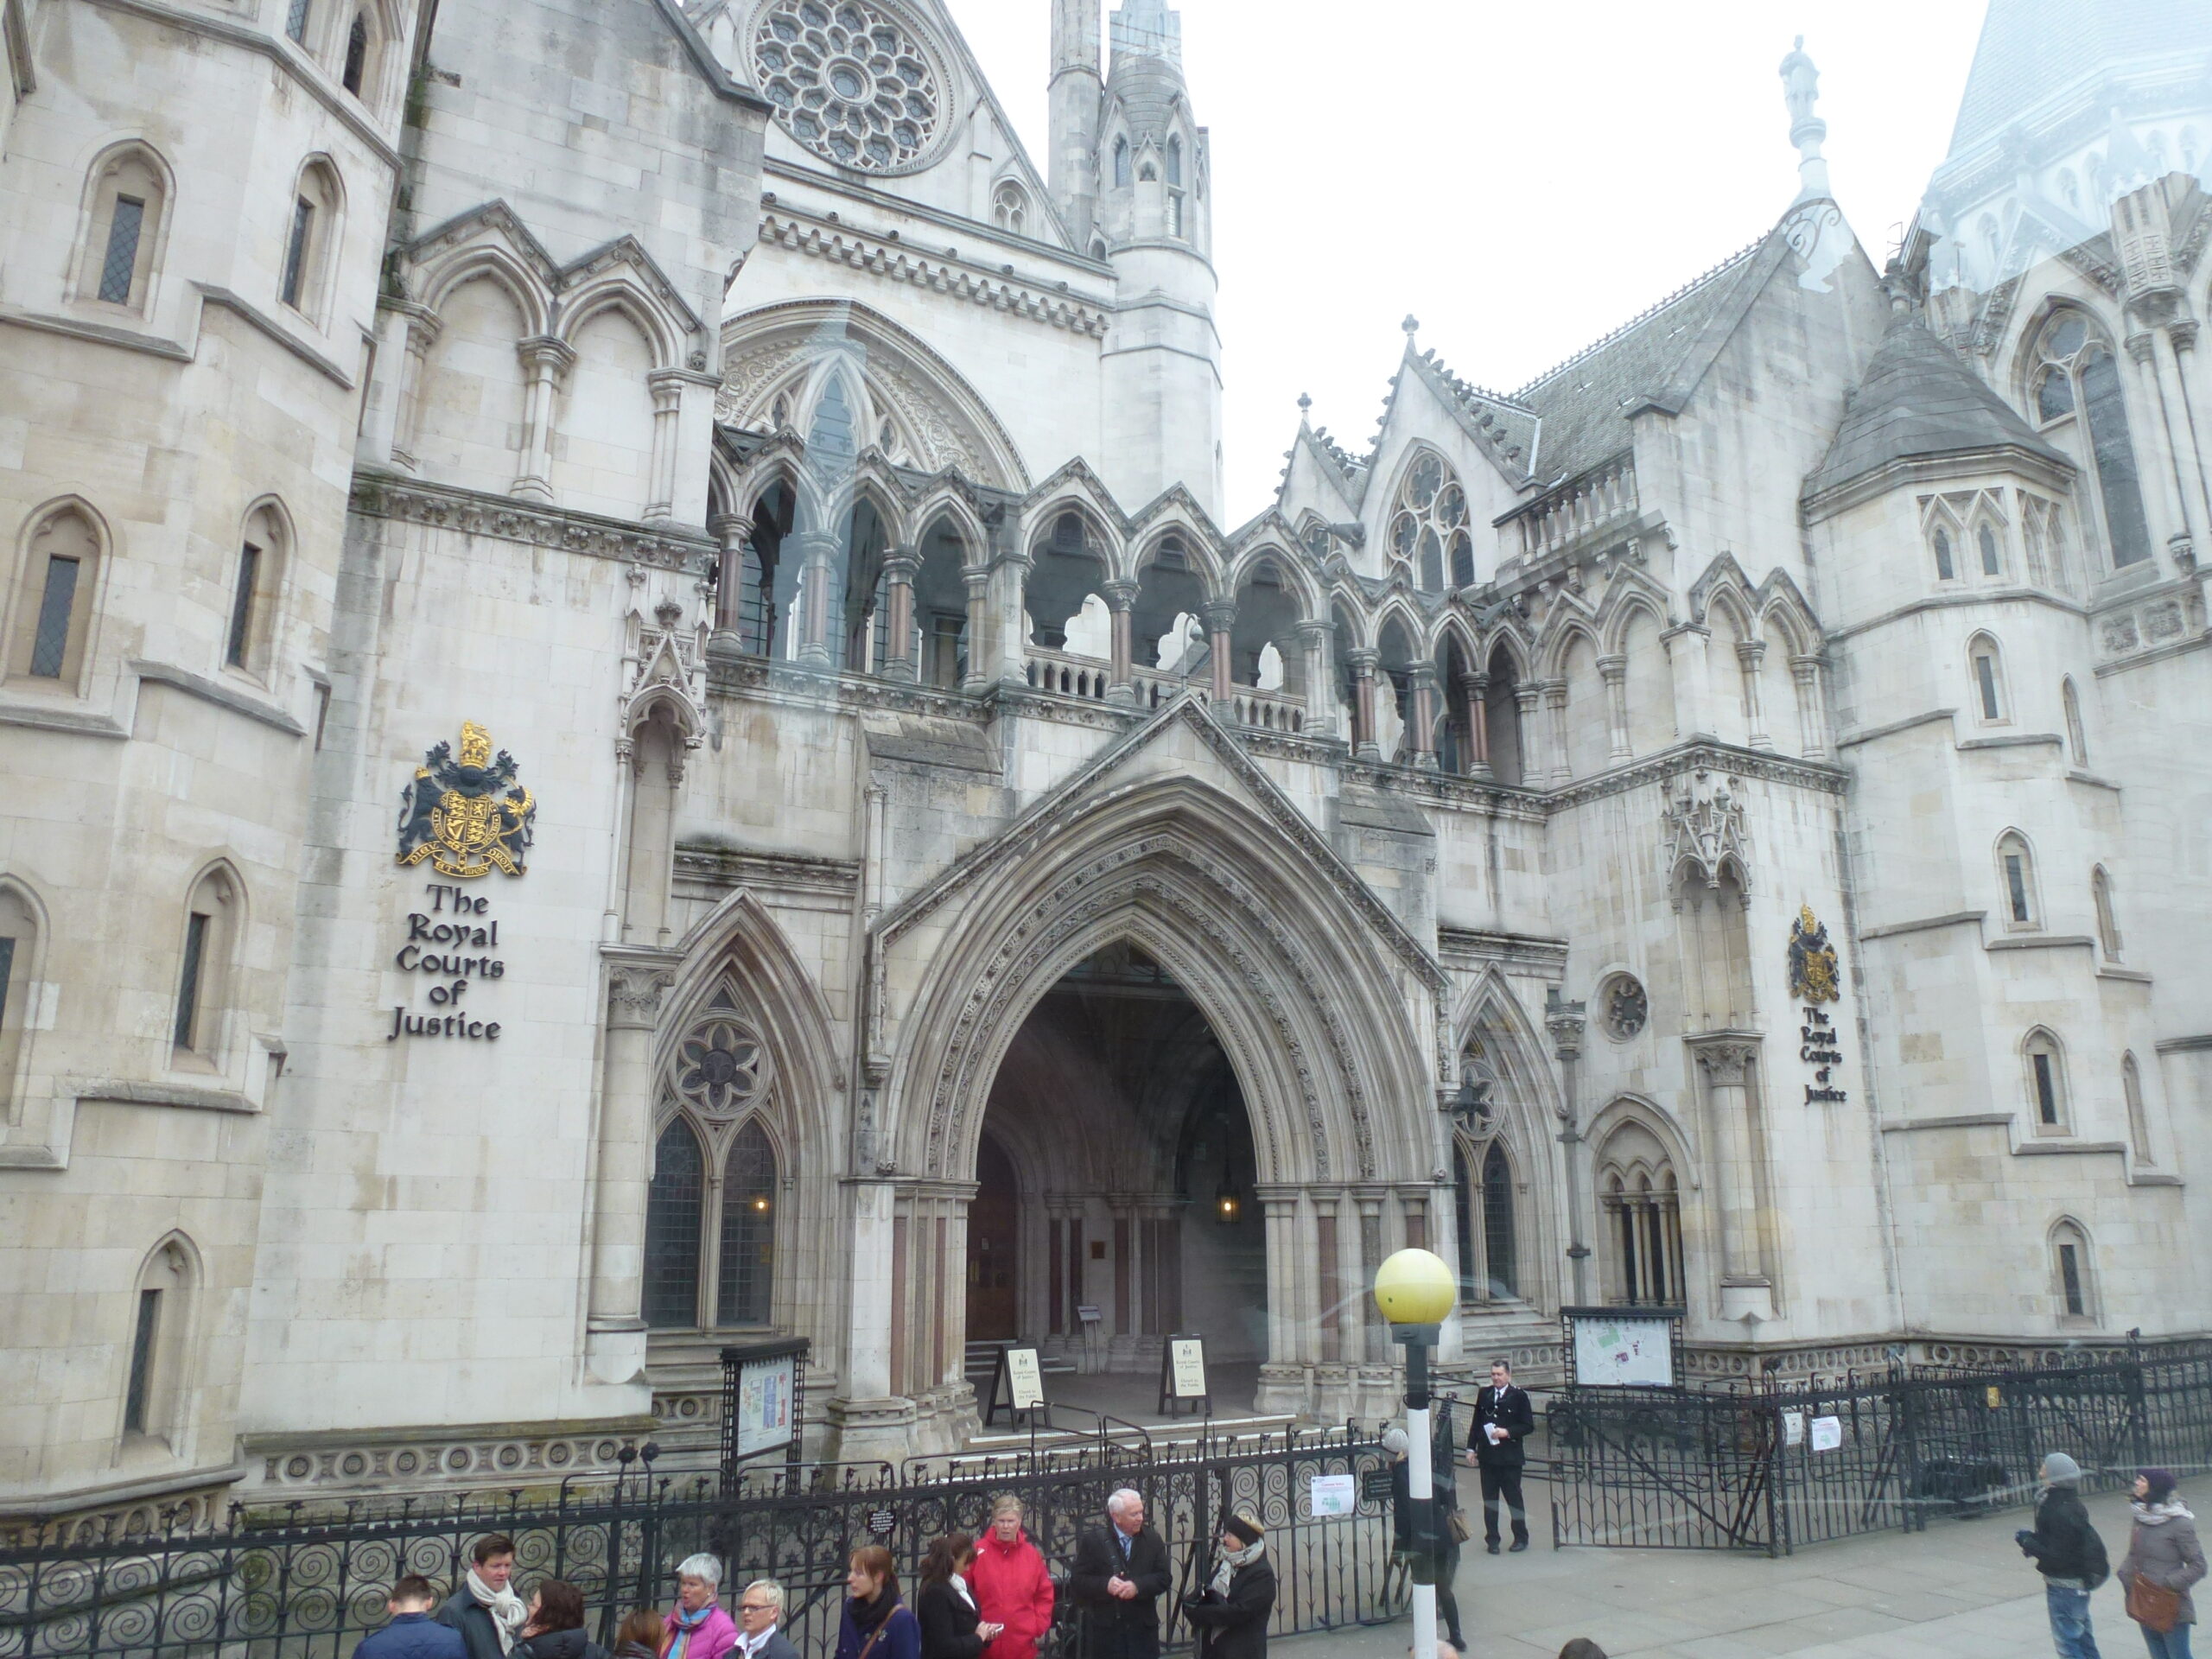 Photograph of the Royal Courts of Justice in London